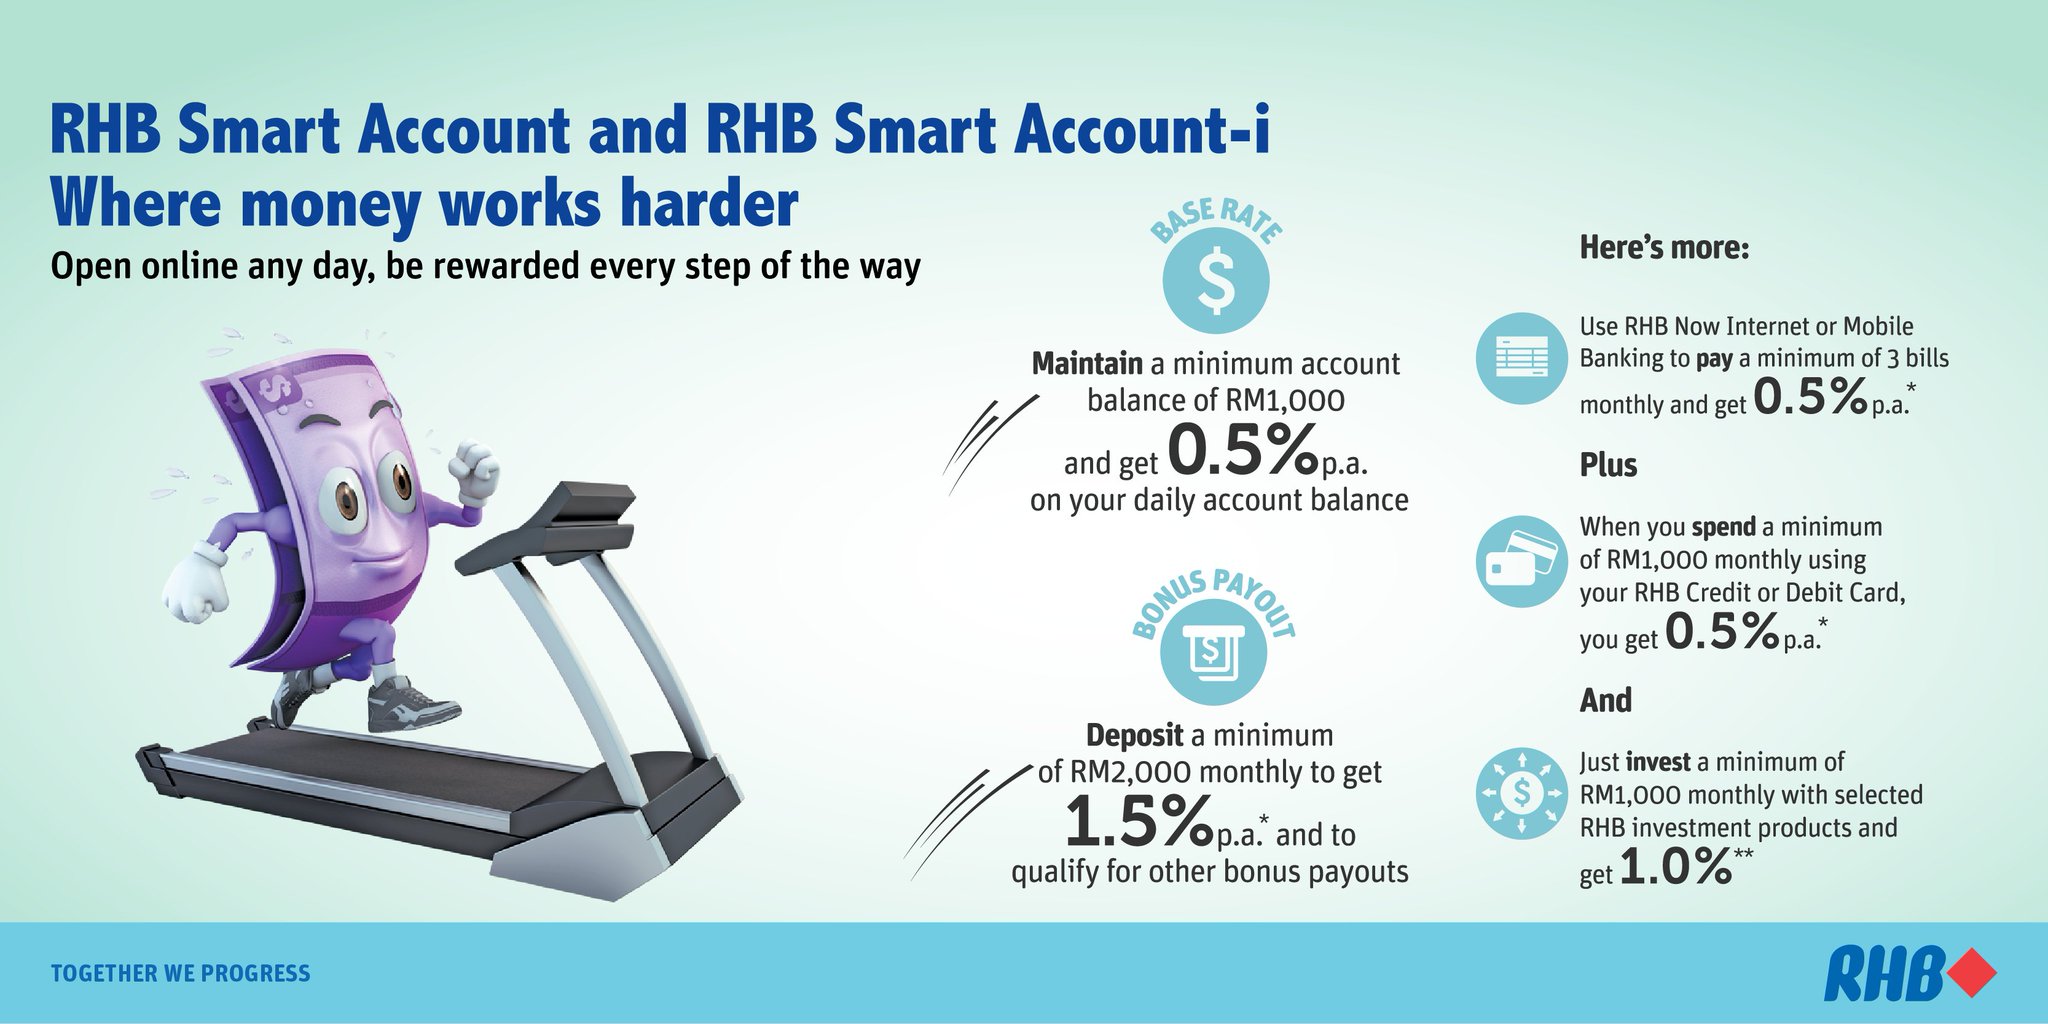 Rhb Group On Twitter Earn More When You Transact With The New Rhb Smart Account Rhb Smart Account I Details Https T Co Sehtw1tkm5